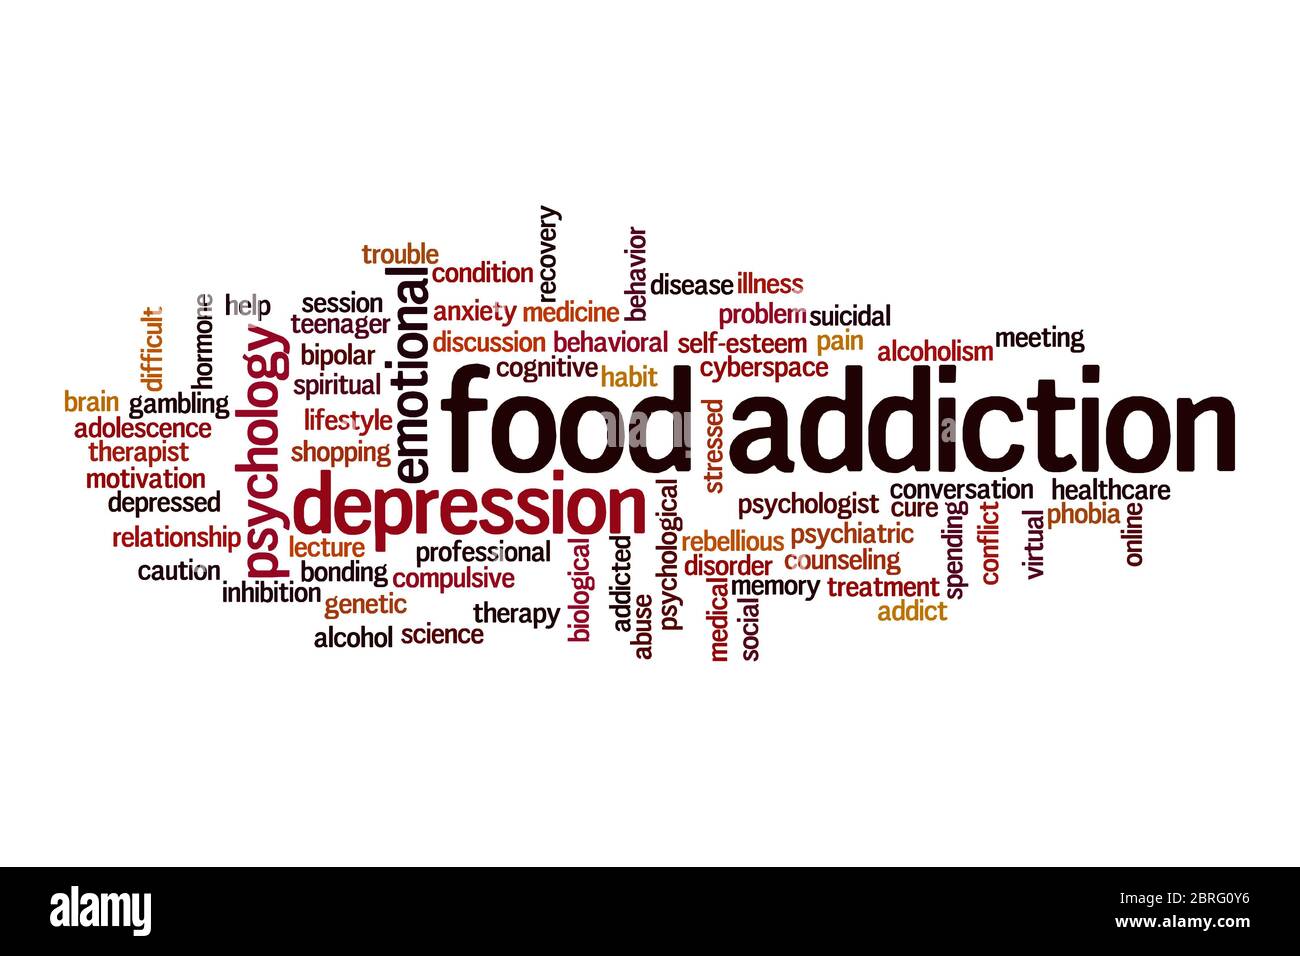 Food addiction cloud concept on white background Stock Photo